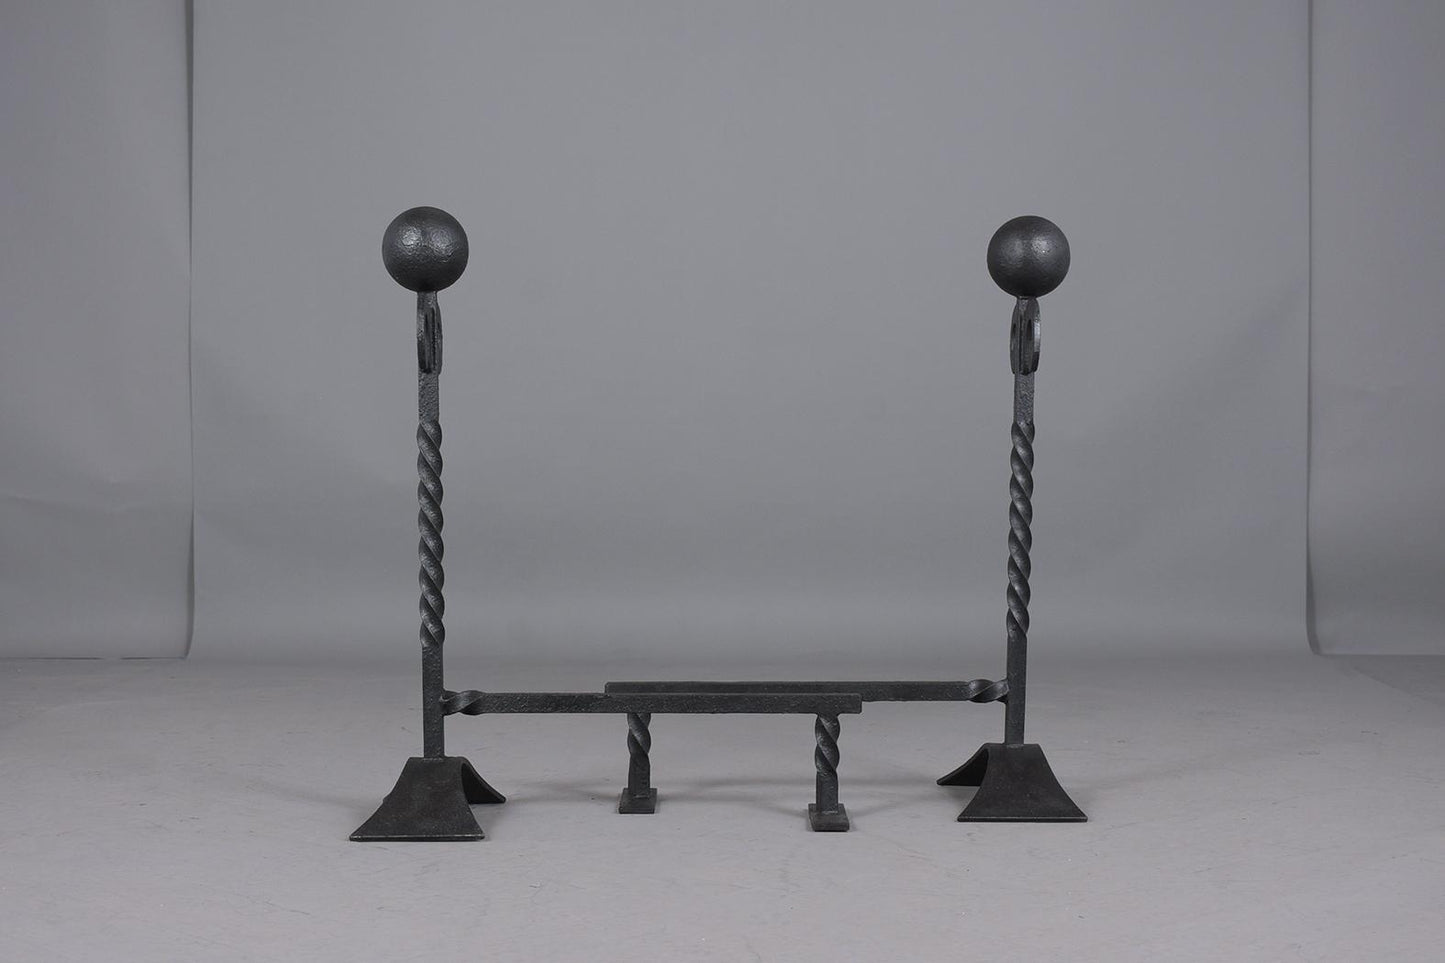 Pair of Iron Fireplace Chenets